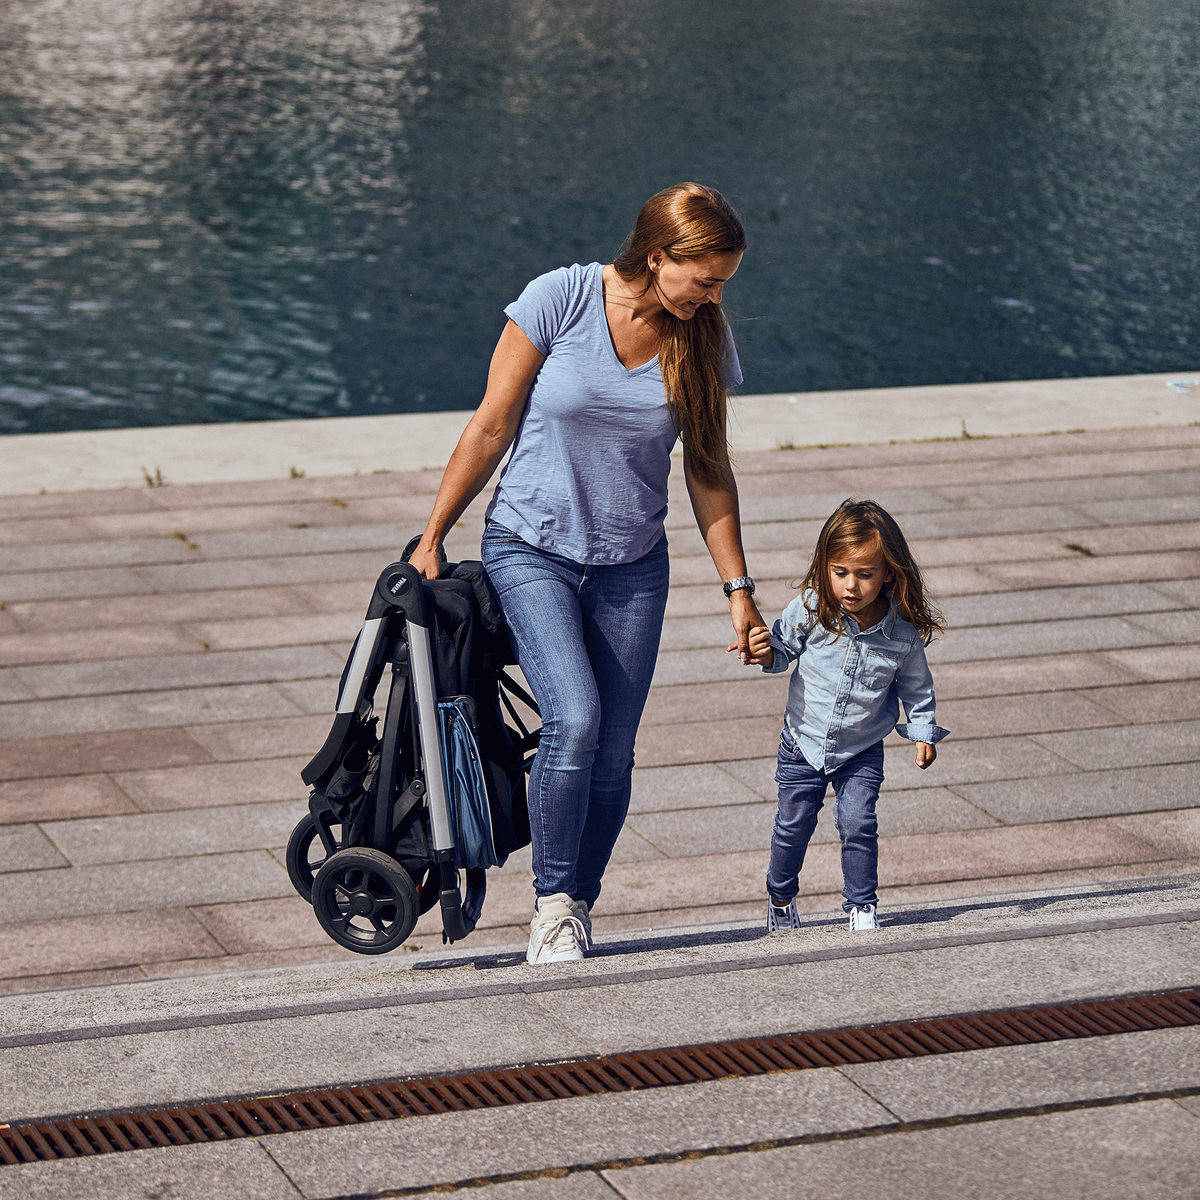 Next to water, a woman walks with her child's hand in one hand, and a folded Thule Spring stroller in the other.